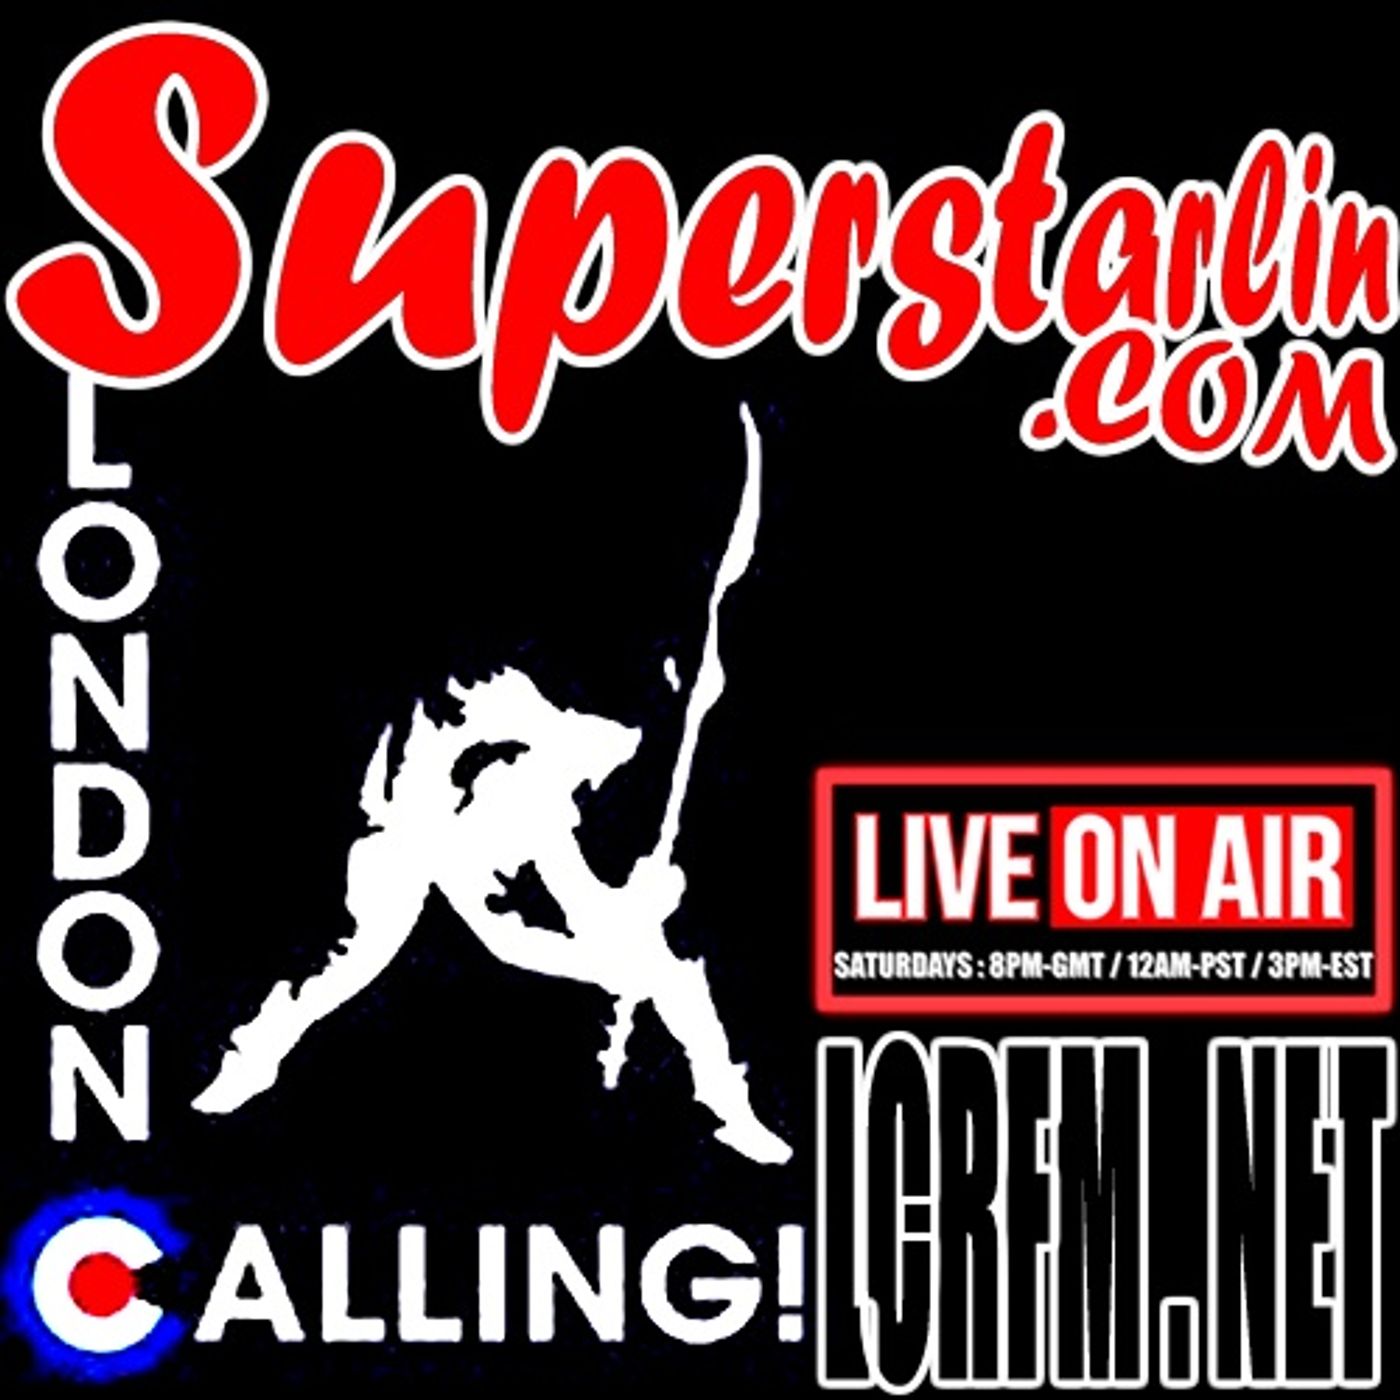 MAY 07 2022... LCRFM..... NEW email is studio@superstarlin.com ,,,, LCRFM new Home is... Superstarlin.com ...